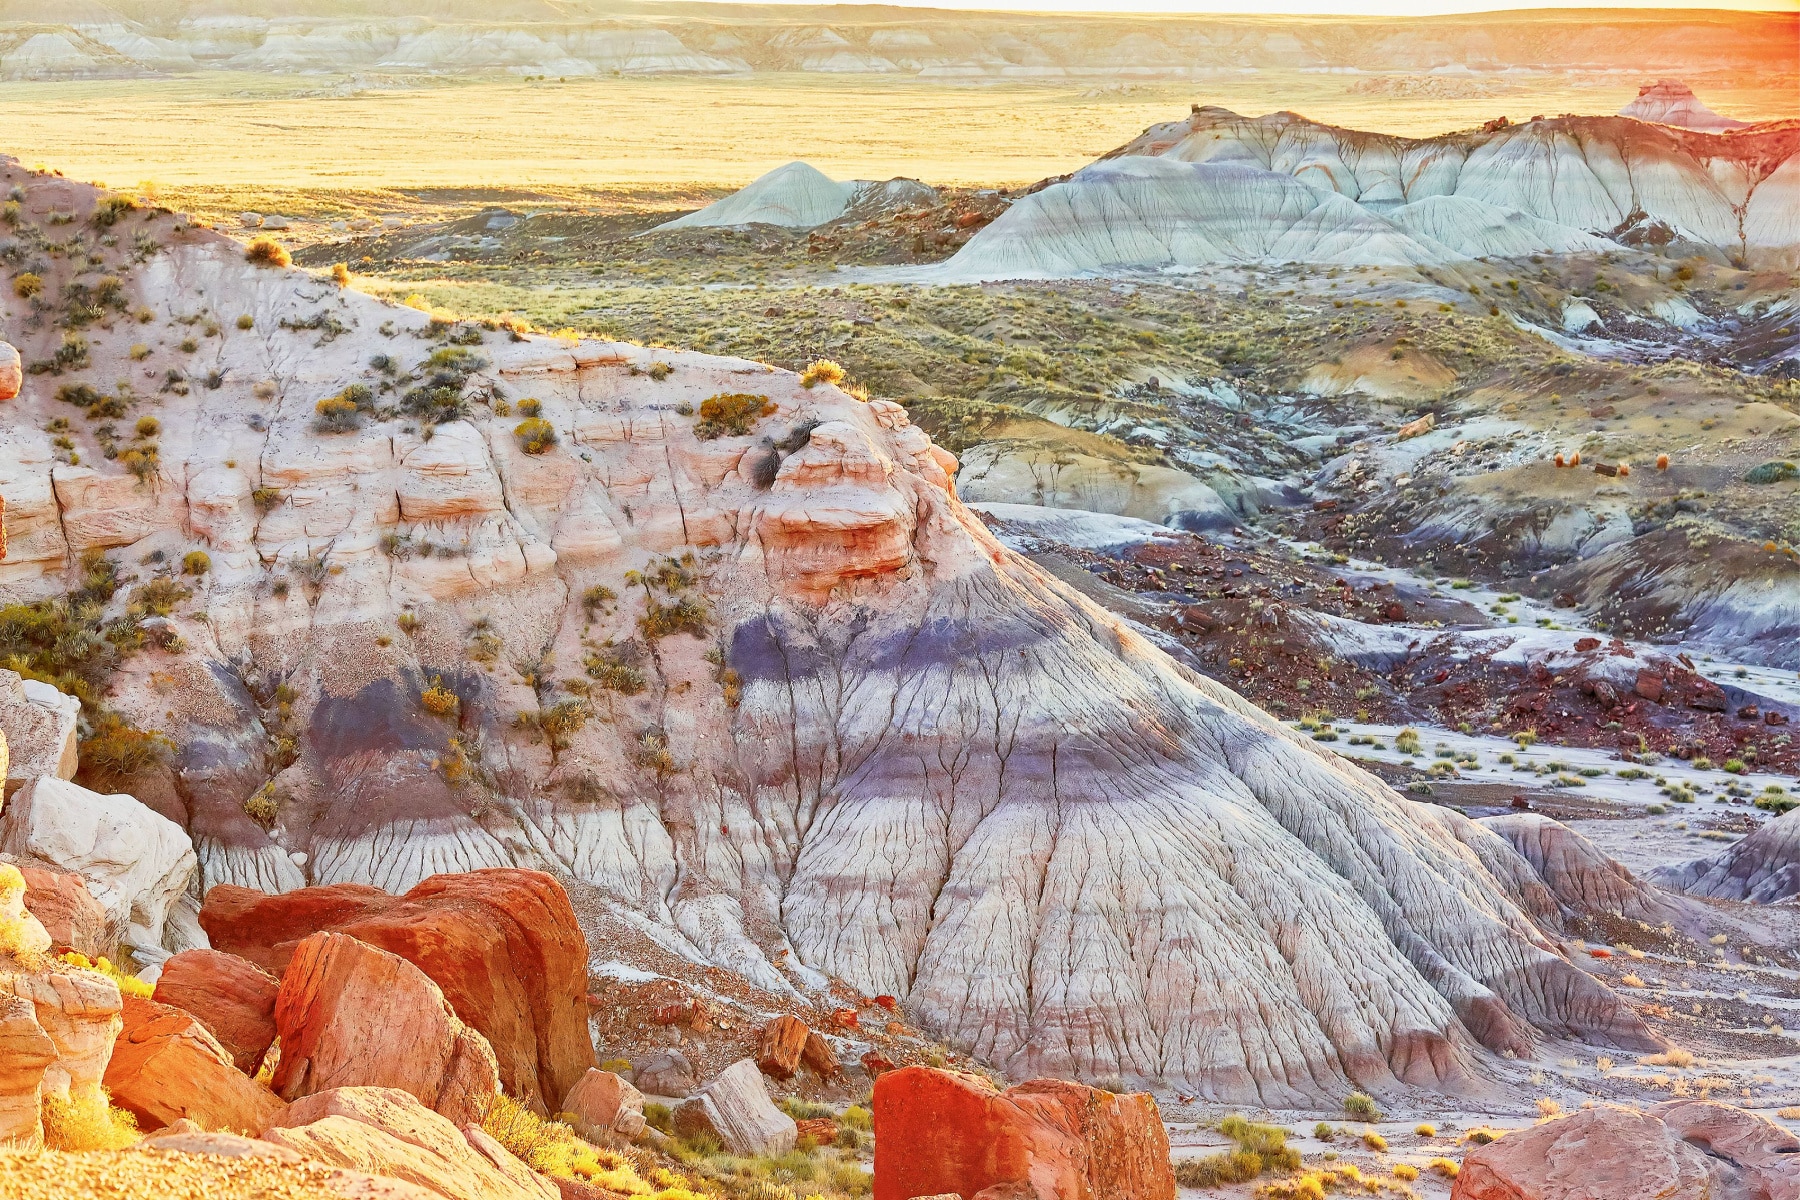 Painted Desert landscape includes infusions of colors such as purple, white, yellow, and orange.